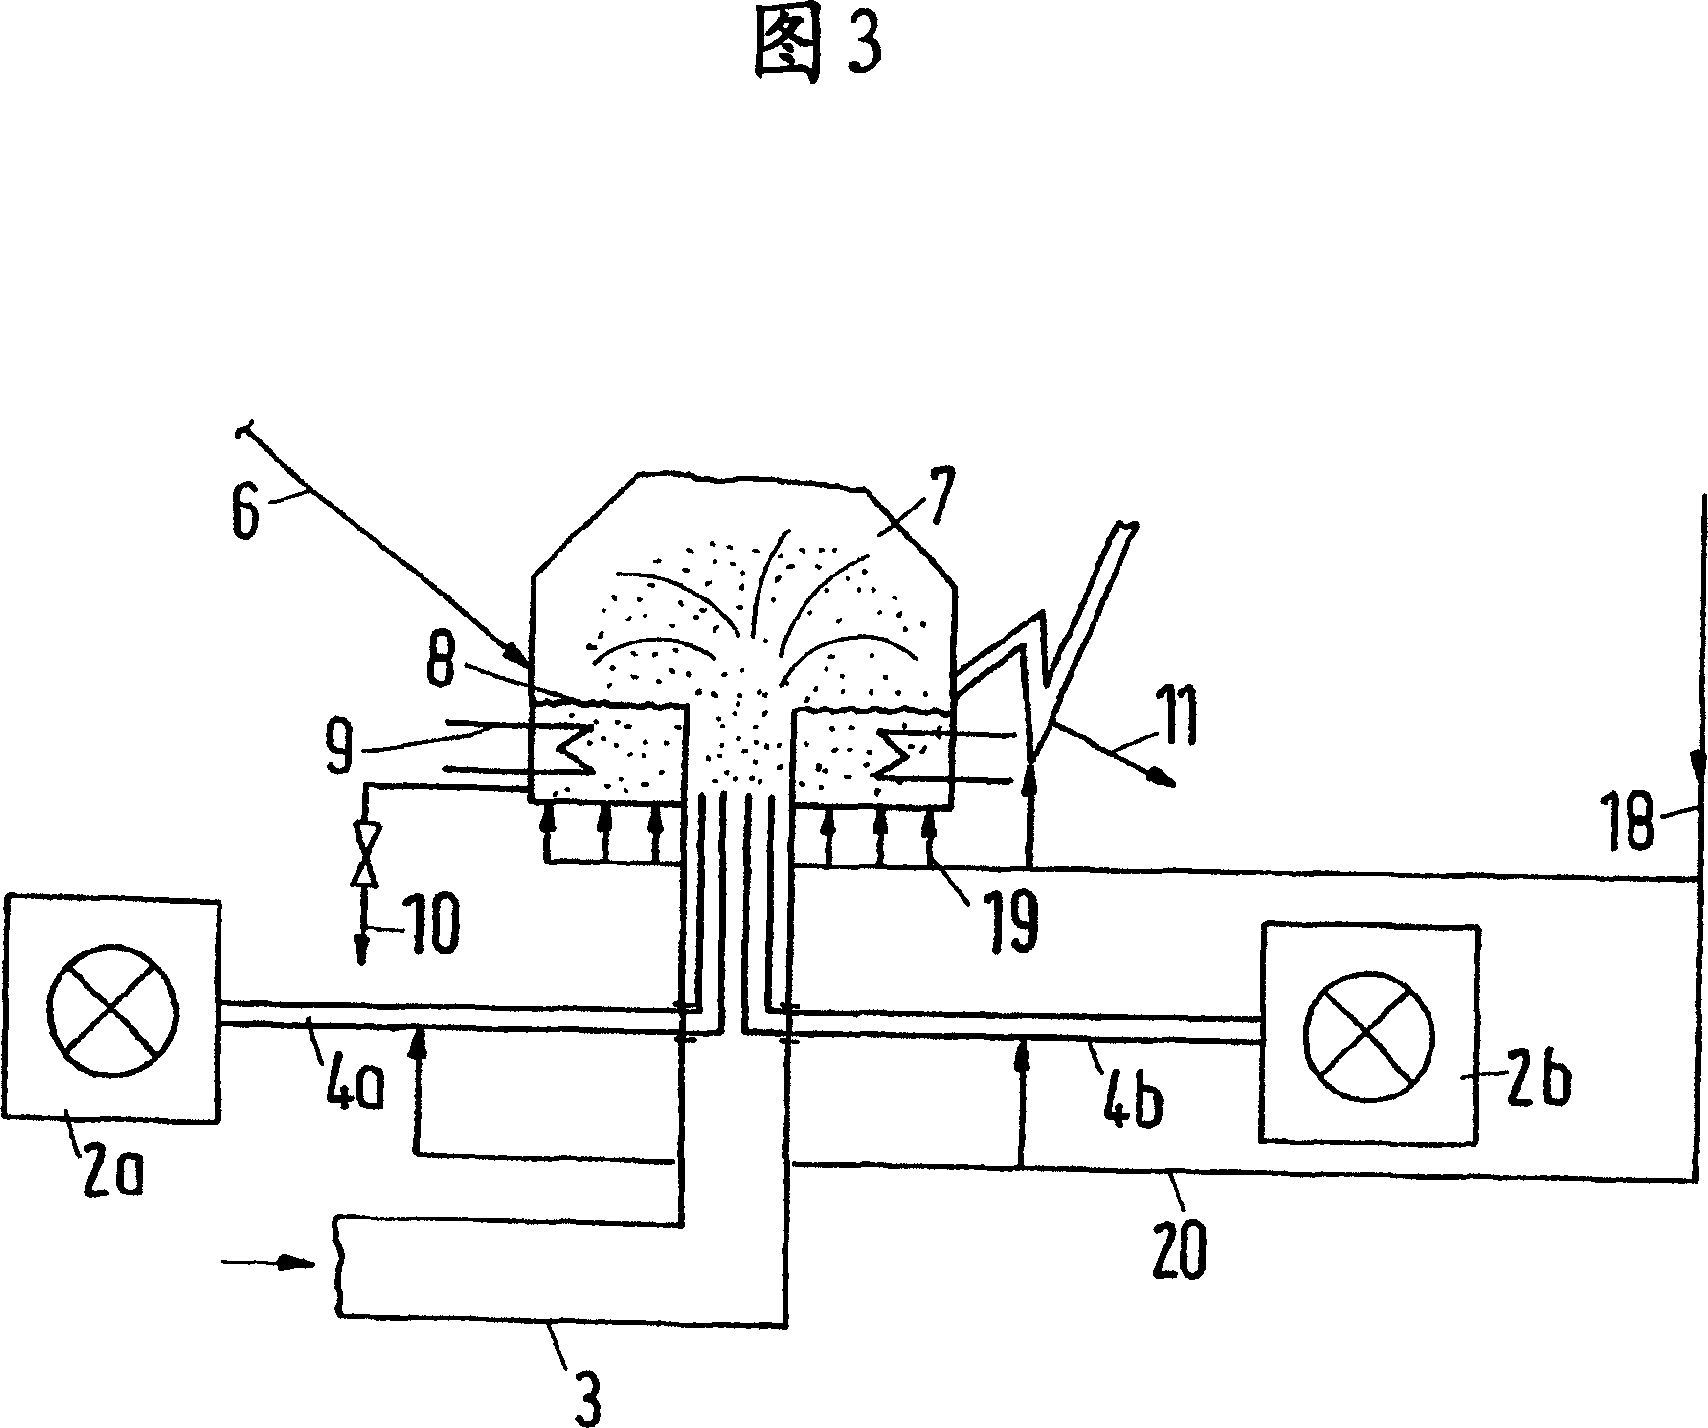 Treatment of granular solids in an annular fluidized bed with microwaves